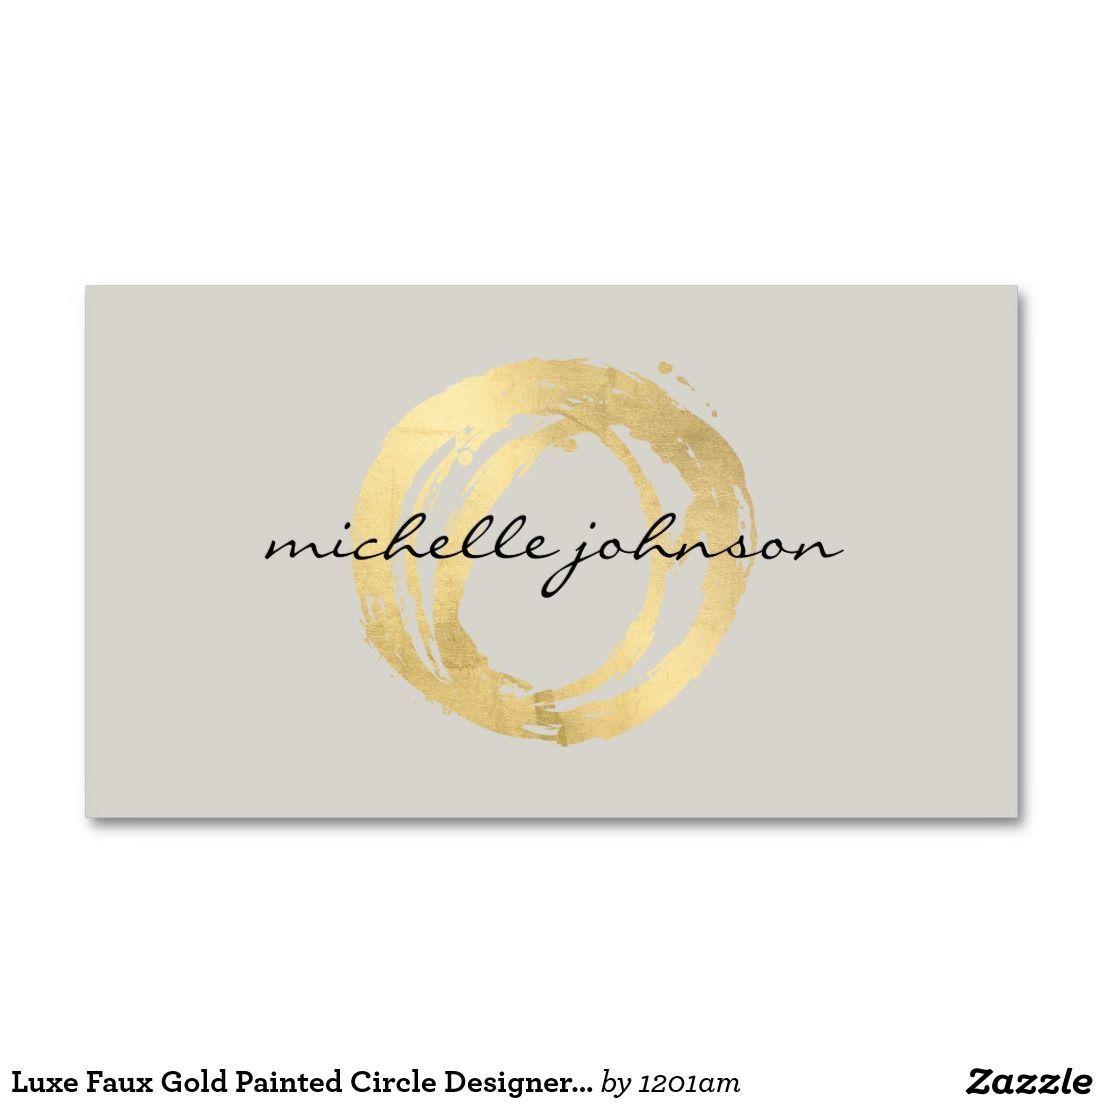 Gray and Gold Logo - Luxe Faux Gold Painted Circle Designer Logo on Tan Business Card ...